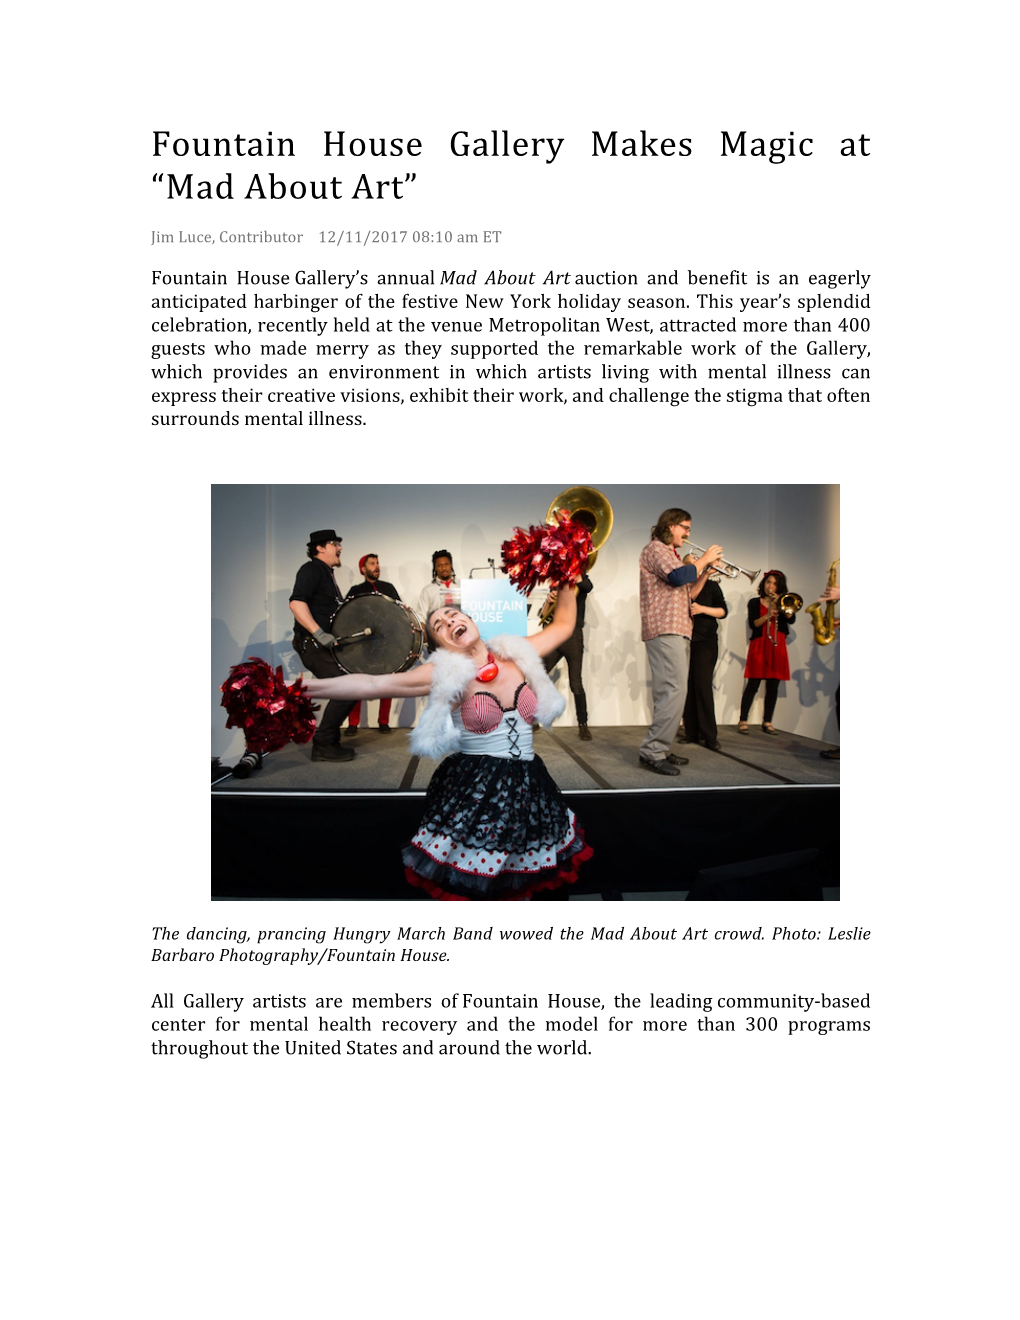 Fountain House Gallery Makes Magic at “Mad About Art”